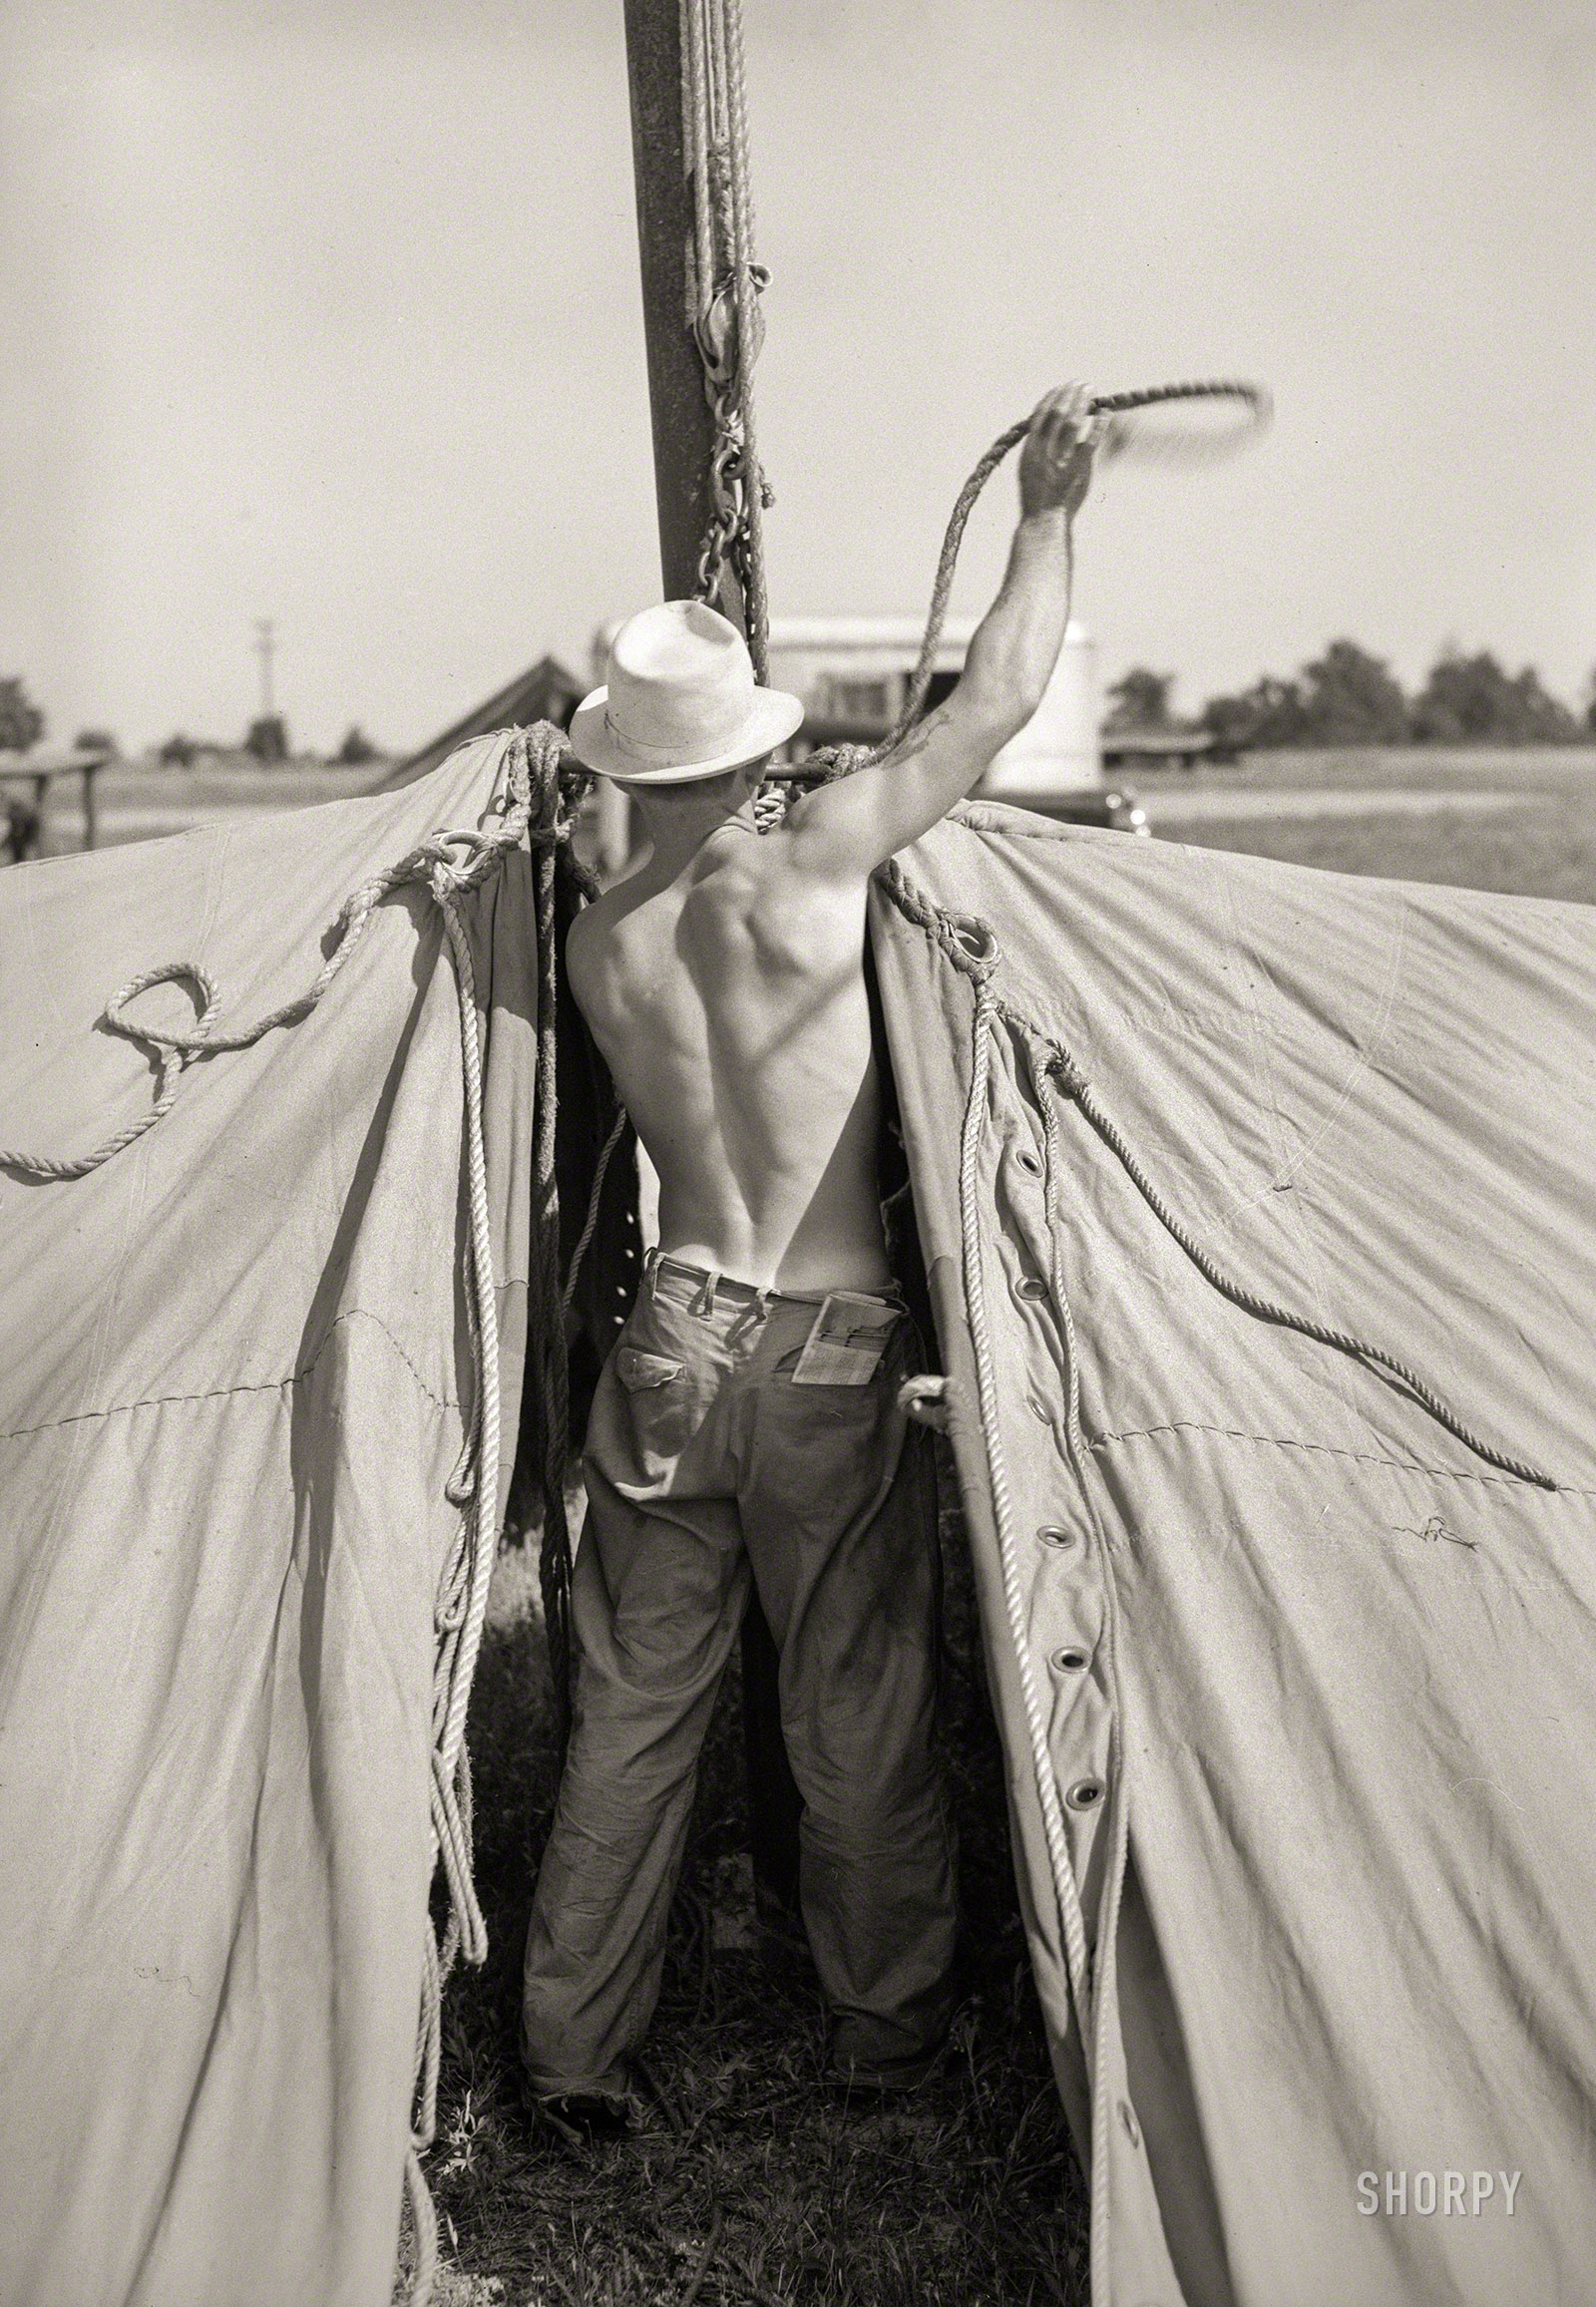 May 1938. "Member of carnival crew at work erecting tent for Lasses White traveling show. Sikeston, Missouri." Photo by Russell Lee. View full size.